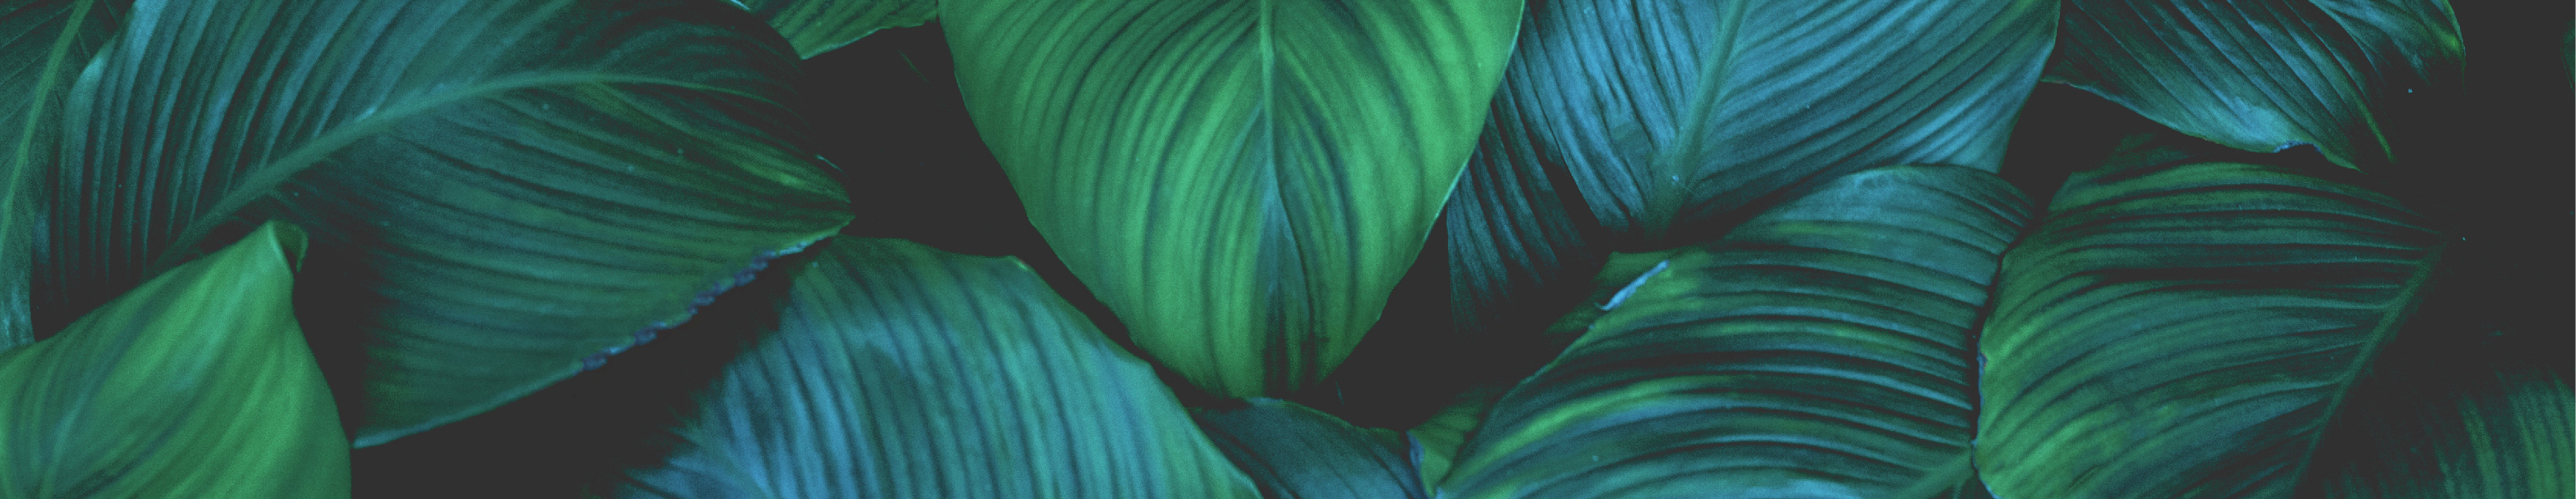 Leaves of Spathiphyllum cannifolium, abstract green texture